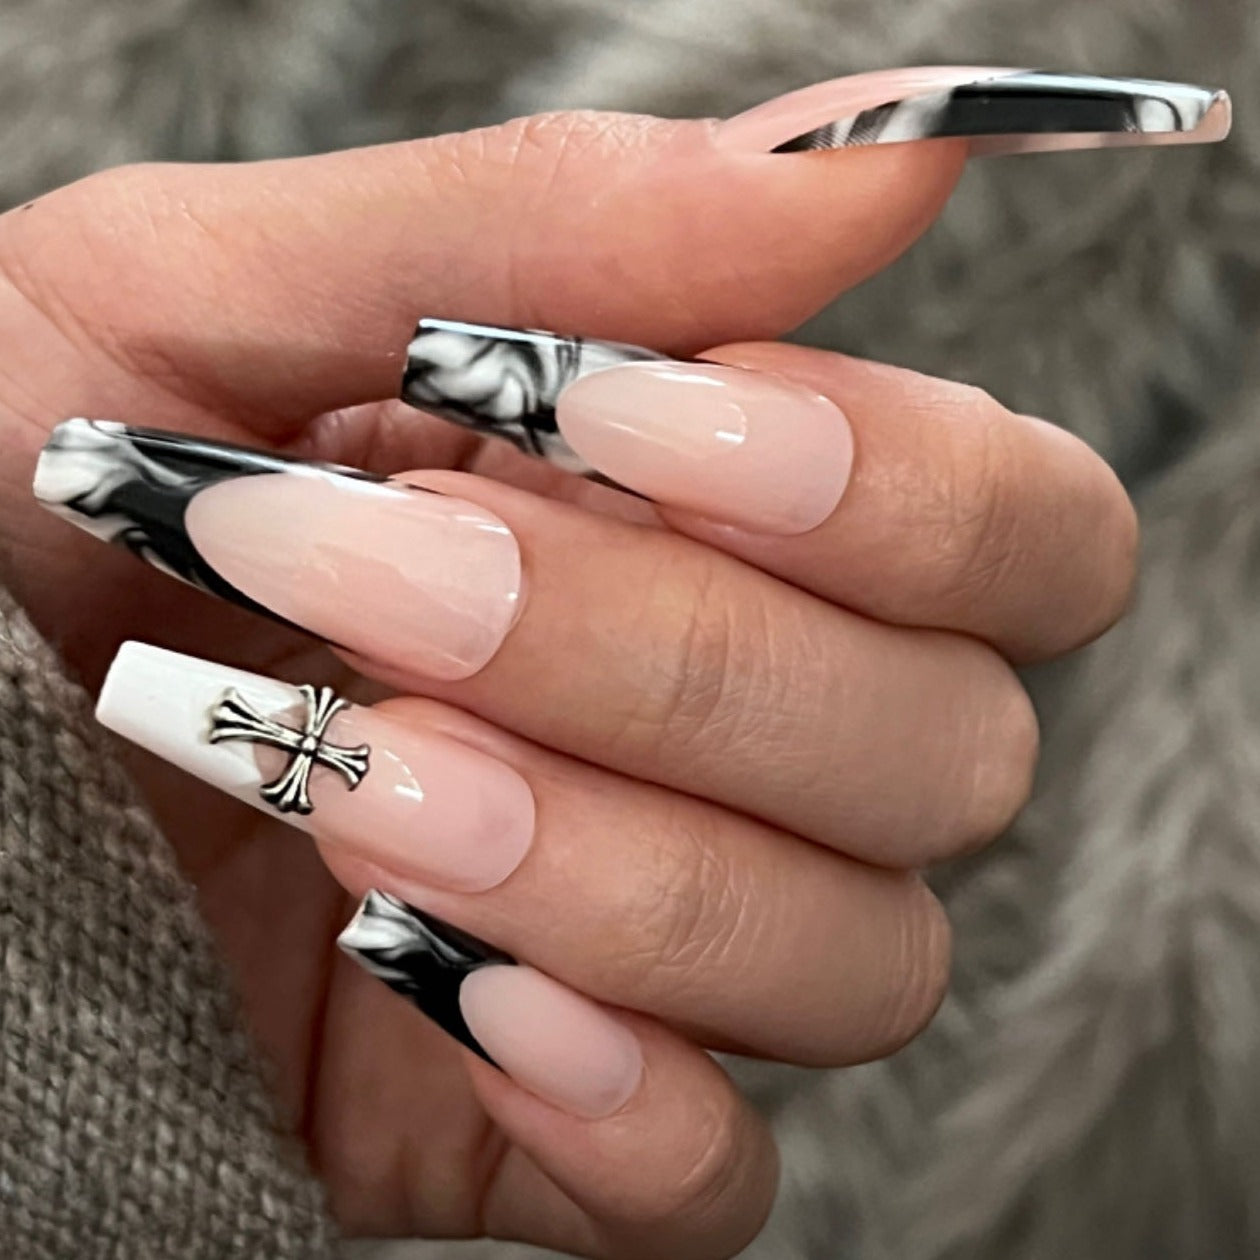 TRENDY TWO-TONE COFFIN SHAPE PRESS ON NAILS